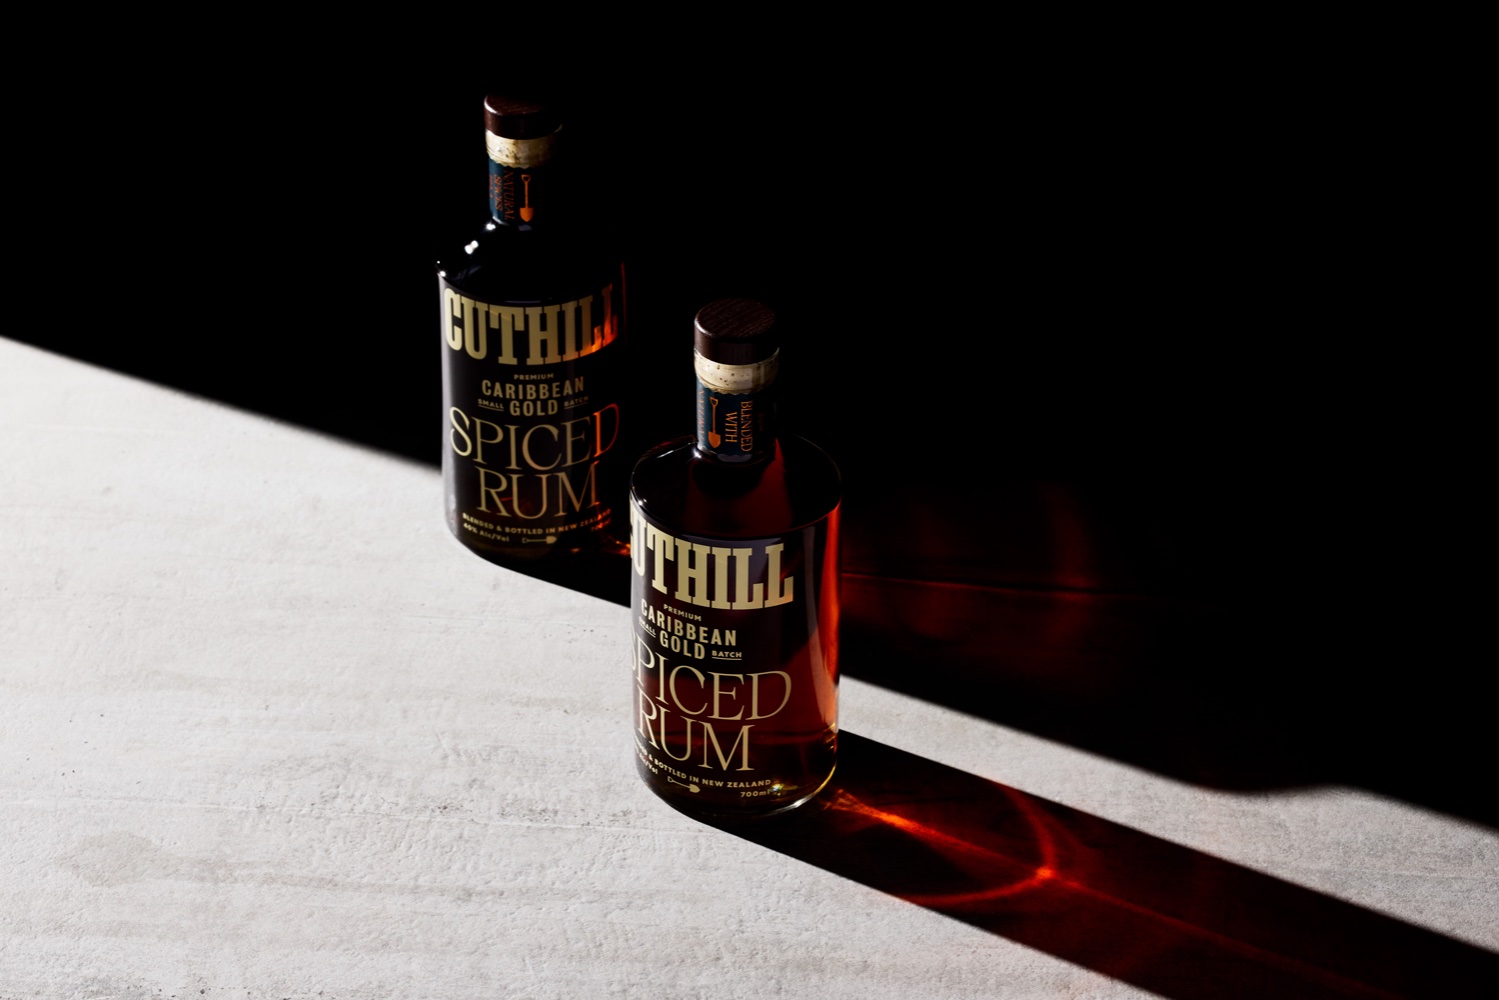 Cuthill Spiced Rum’s Intricately Type Driven Design